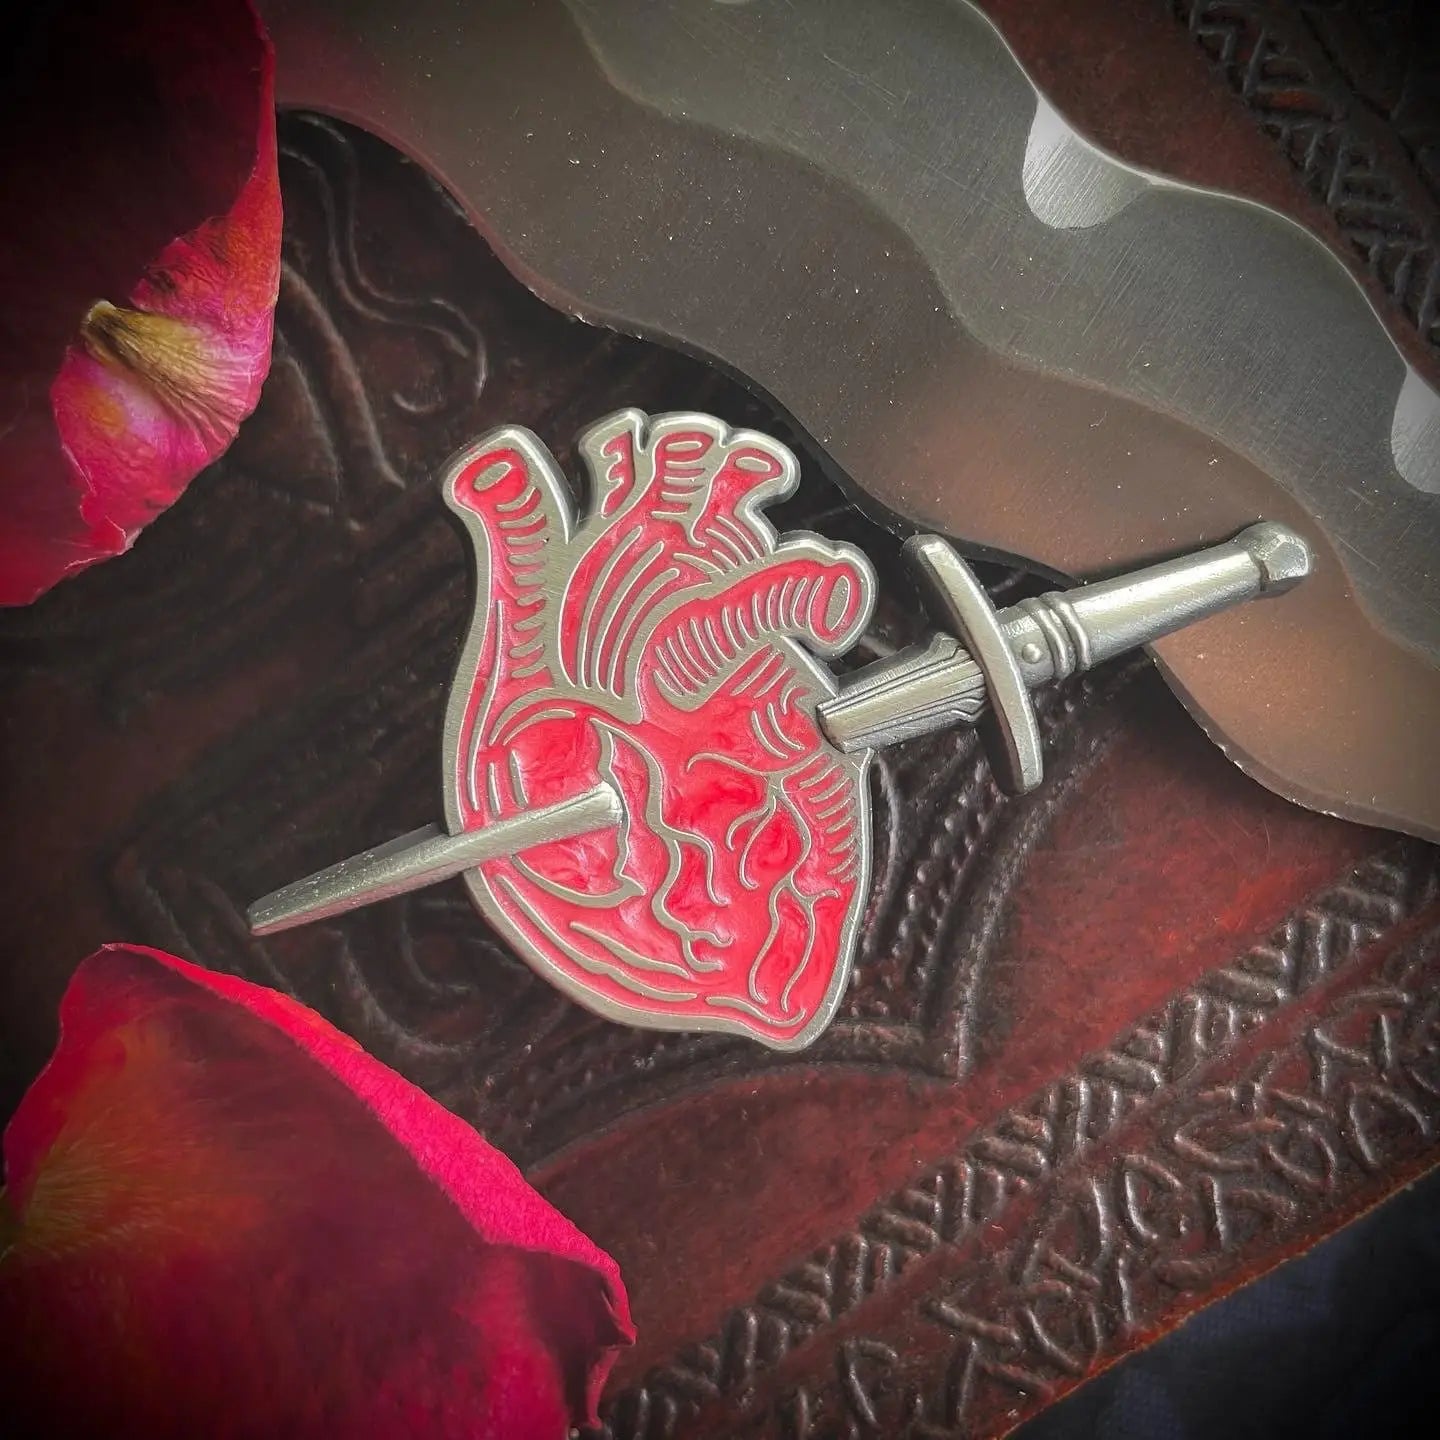 A pearly silver metal hard enamel pin with red detailing of an anatomical style heart being pierced by a 3D sculpted pointy dagger. Shown on a wooden table surrounded by rose petals